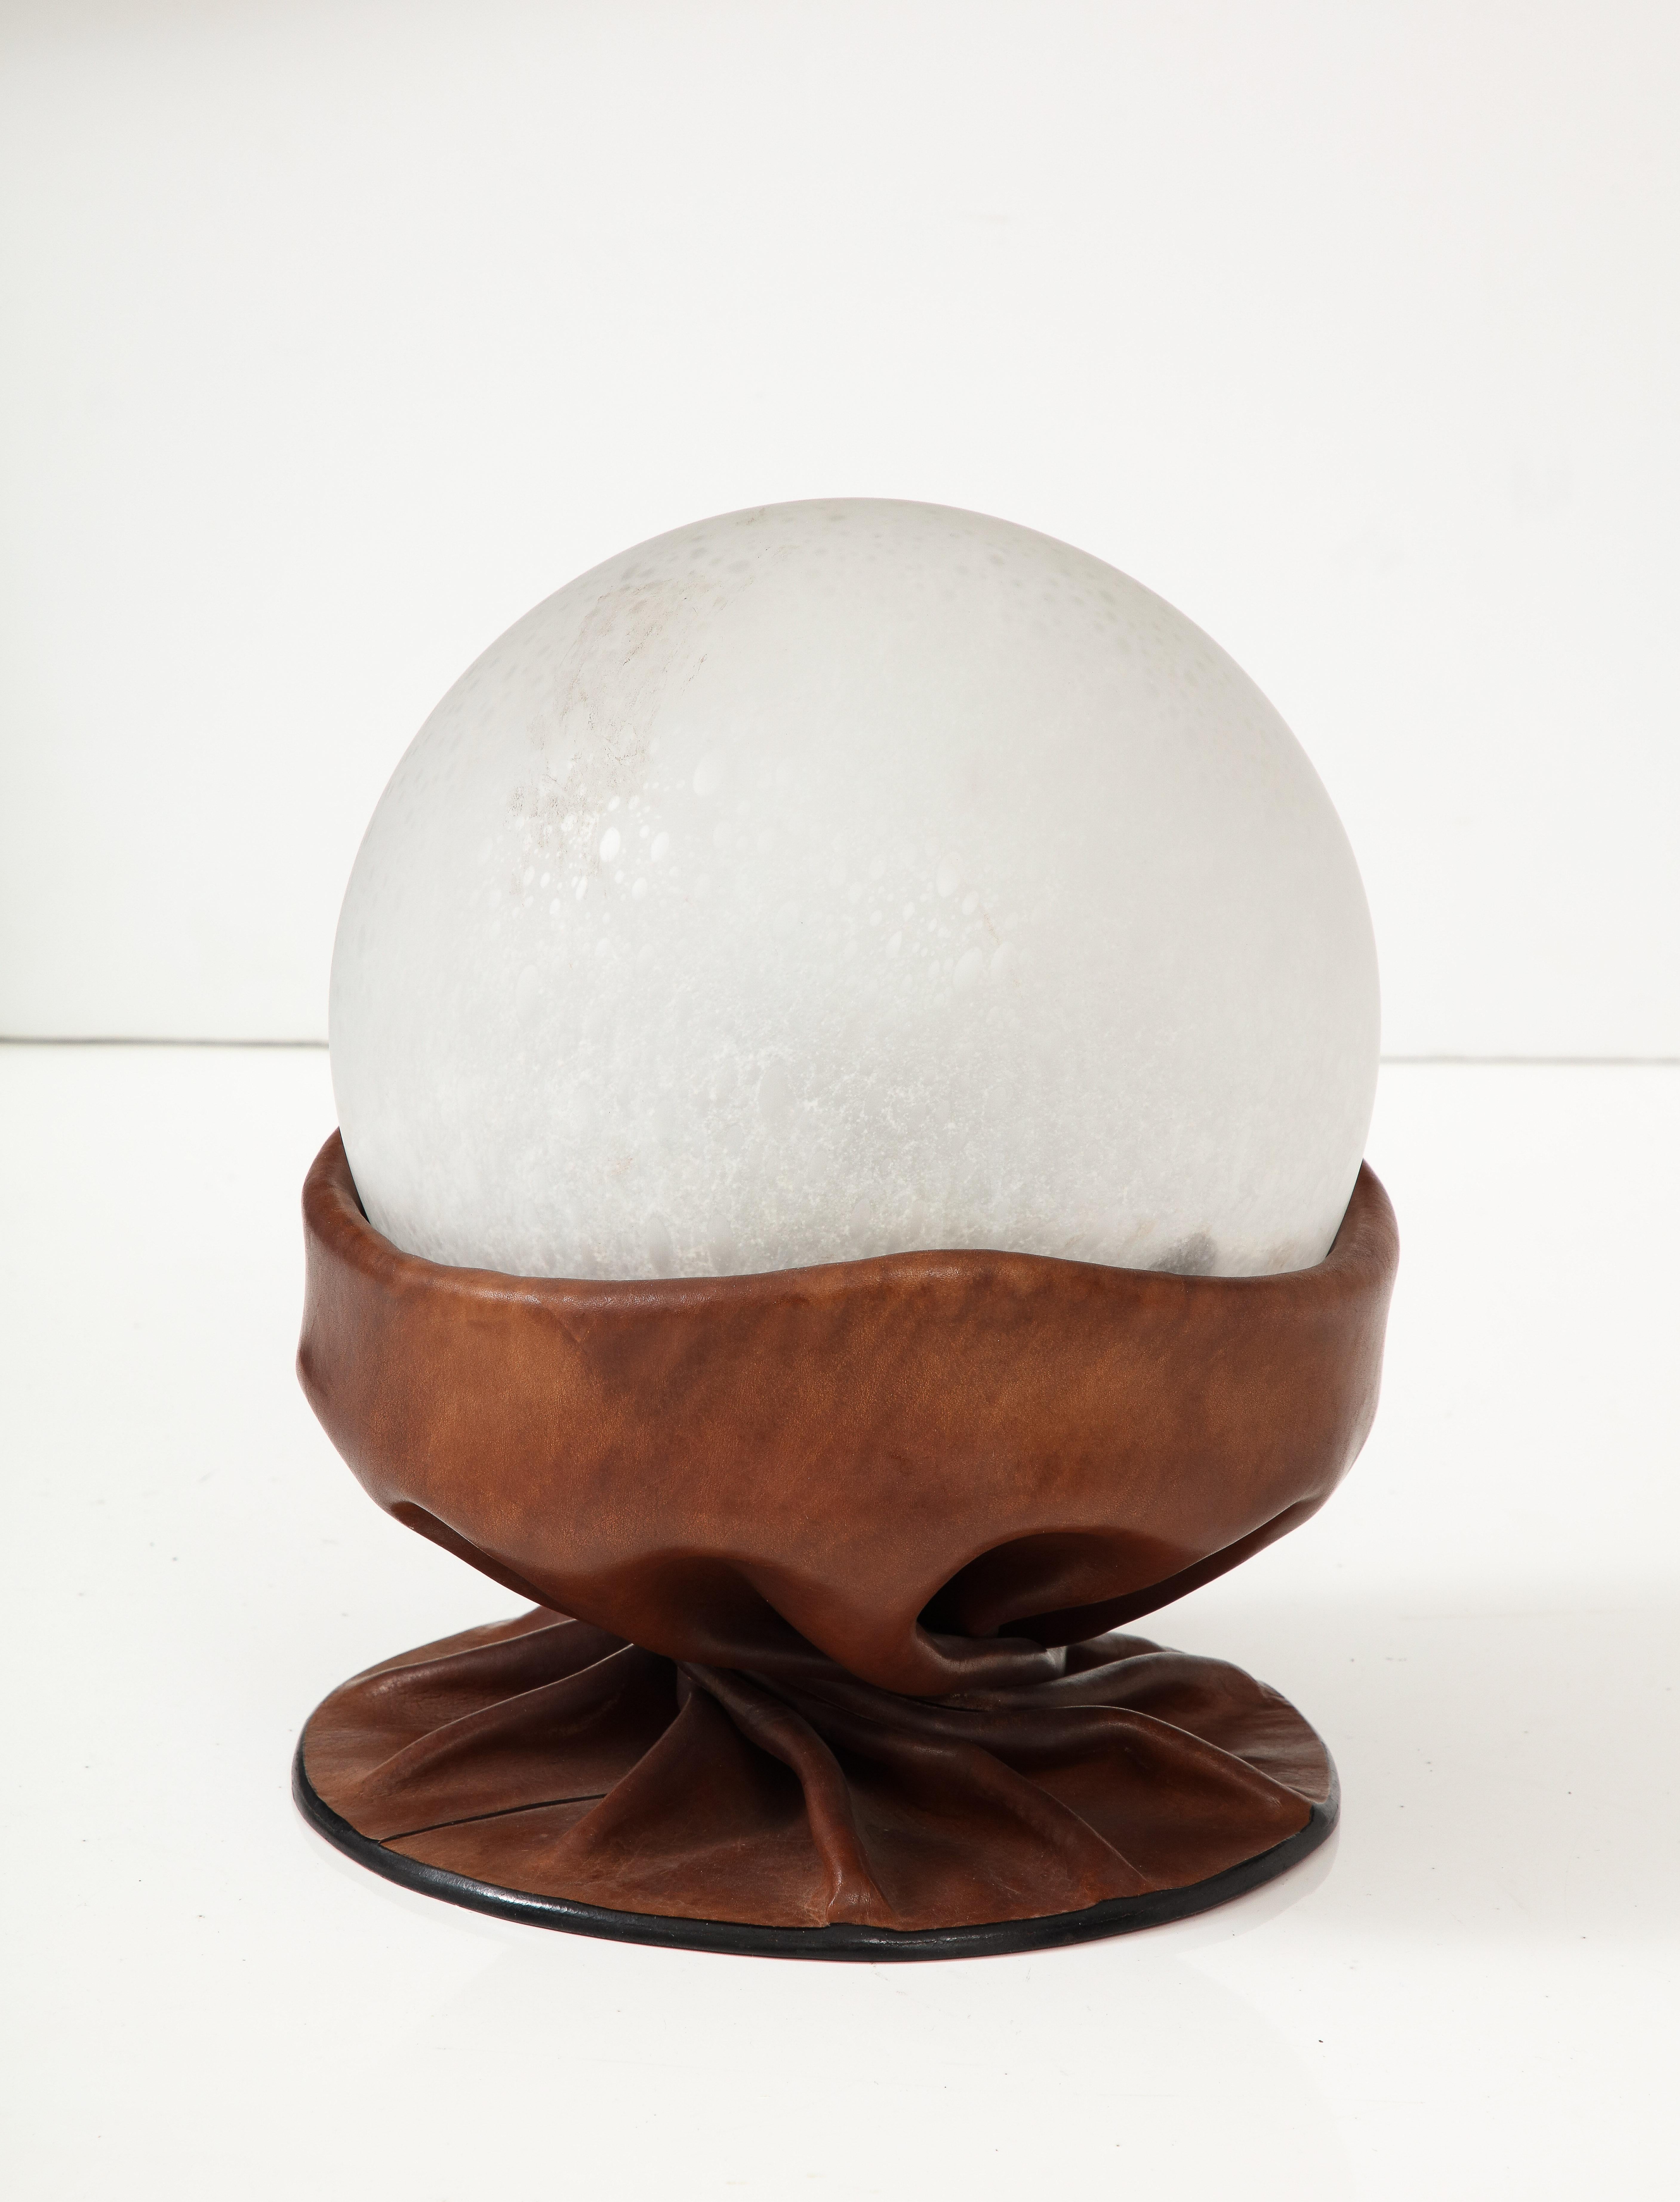 Italian space age leather and glass table lamp, the draped warm brown leather base supports a mottled hand-blown glass orb. Emits a wonderfully warm glow.
by Nova Tecno, Italy, circa 1960's
Size: 12 1/2